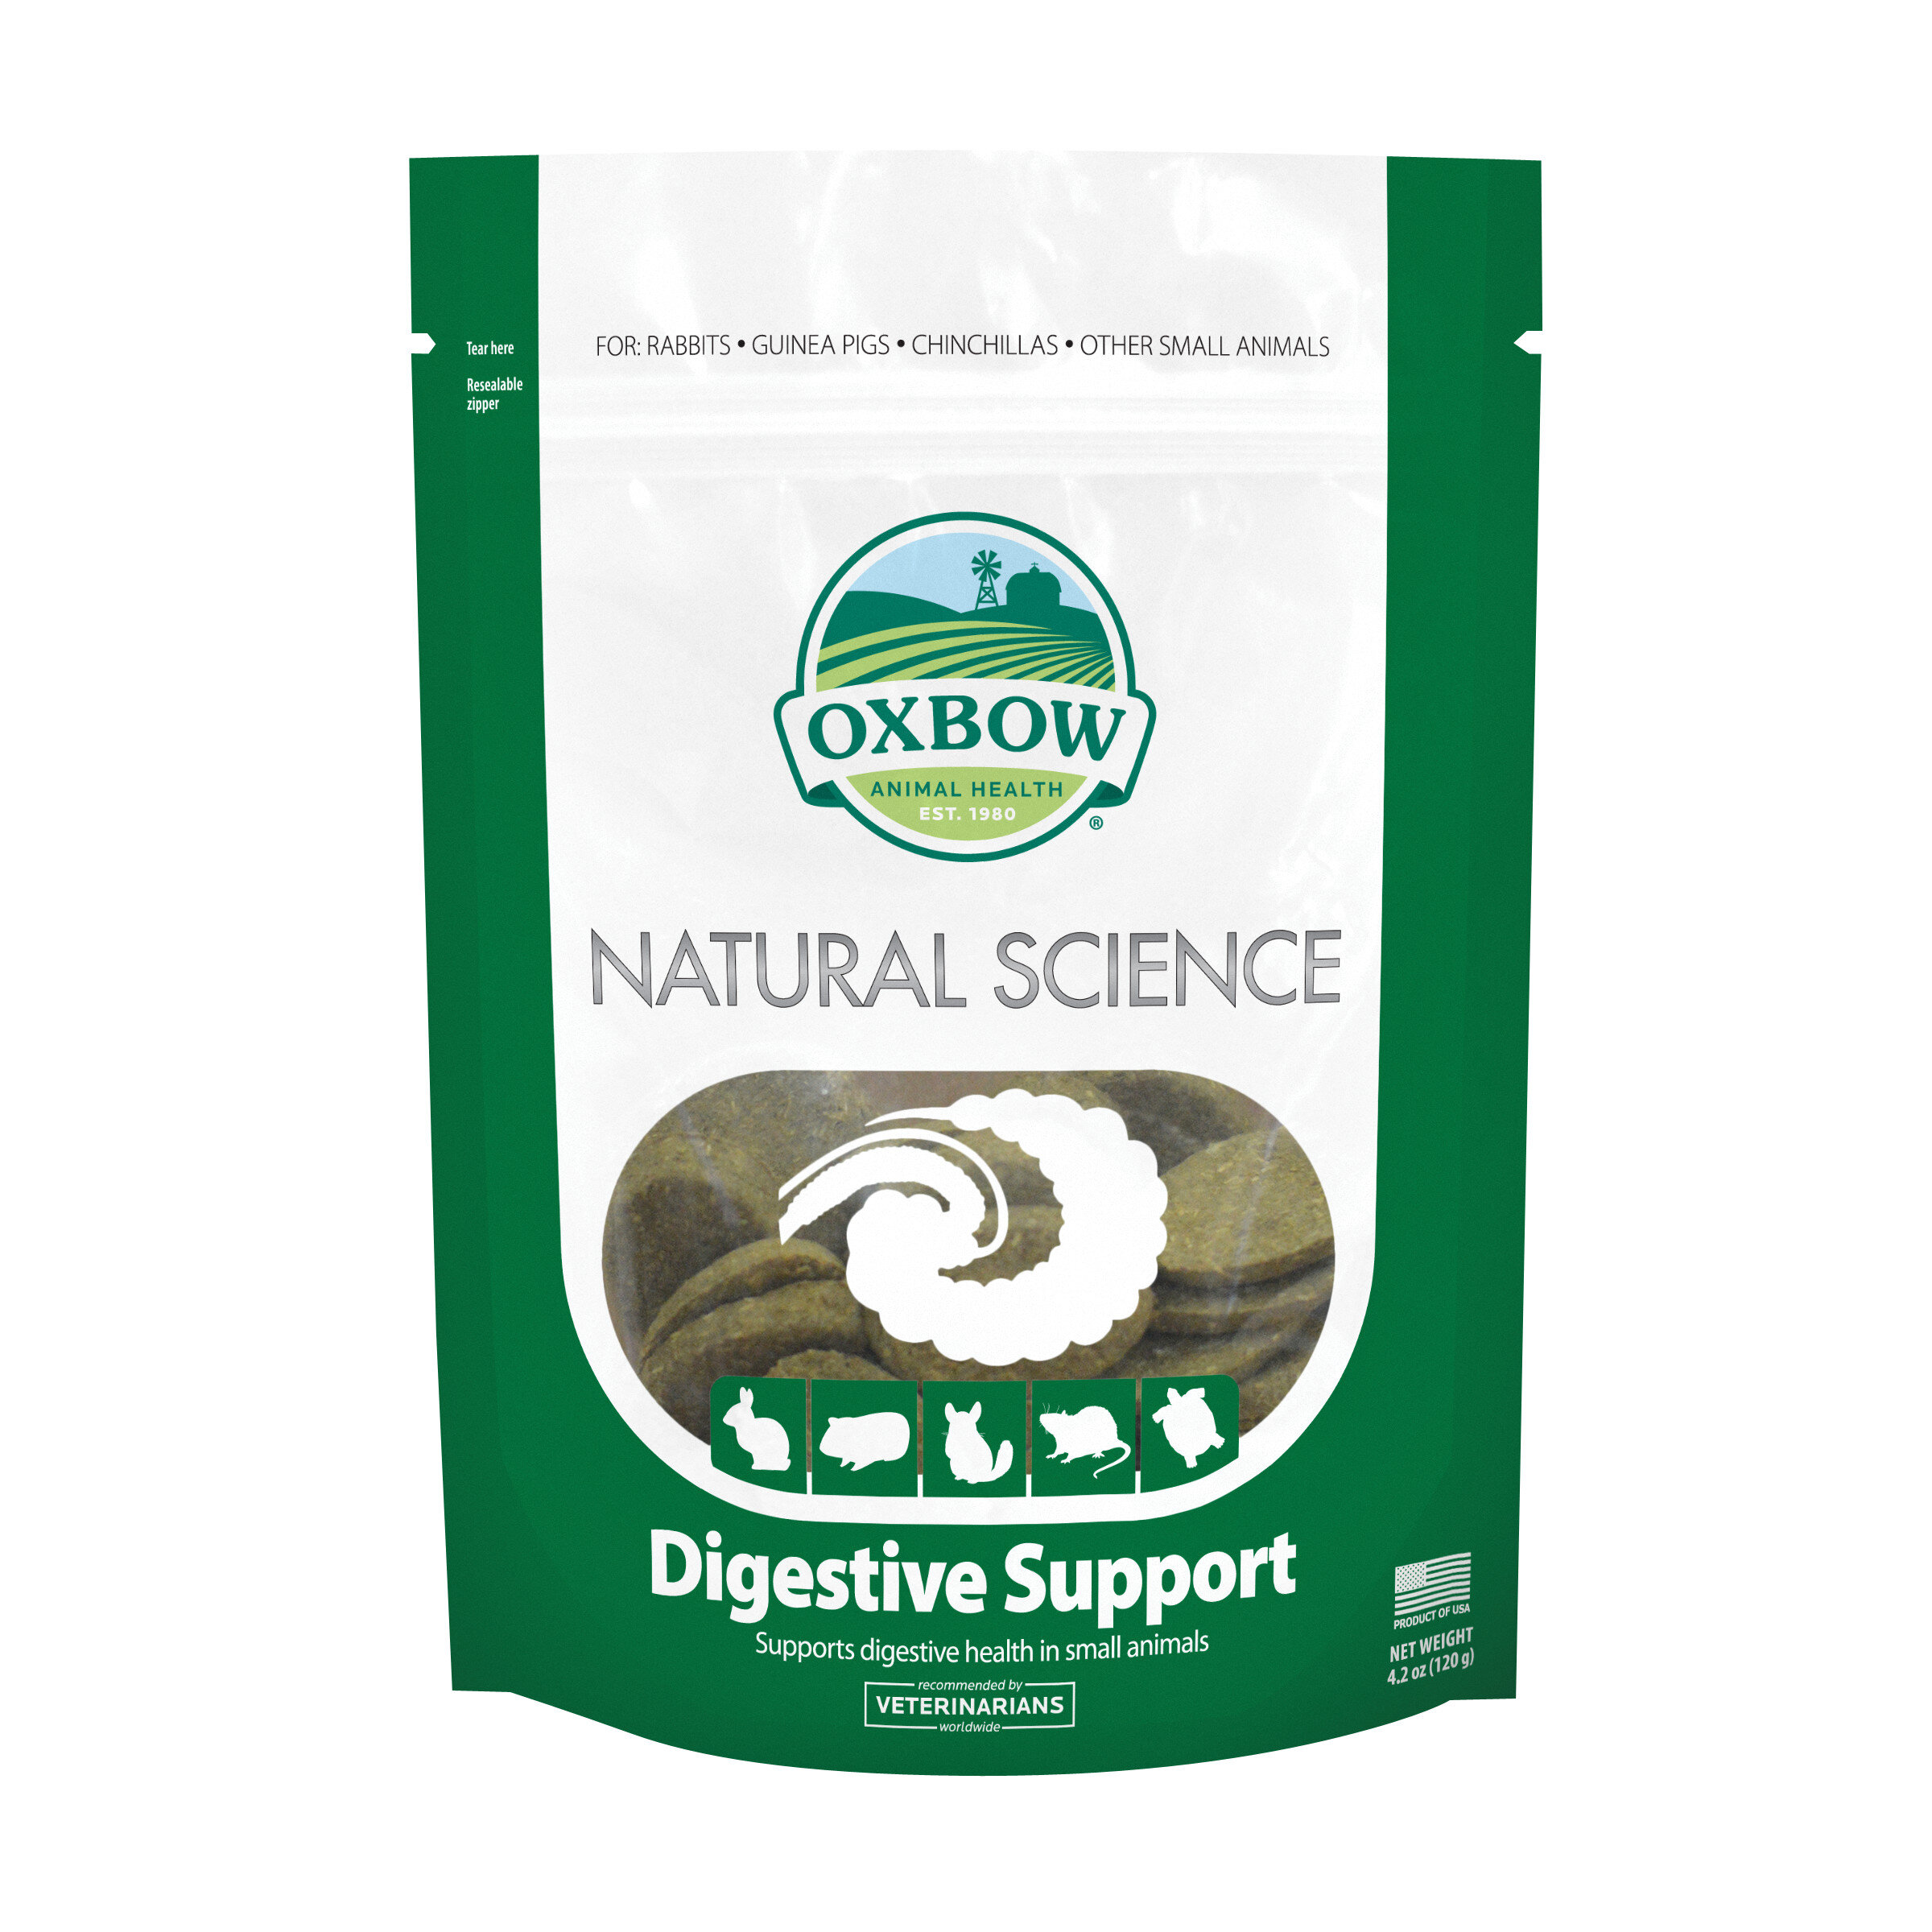 744845-71080_8_Natural_Science_Digestive_Support_main.jpg